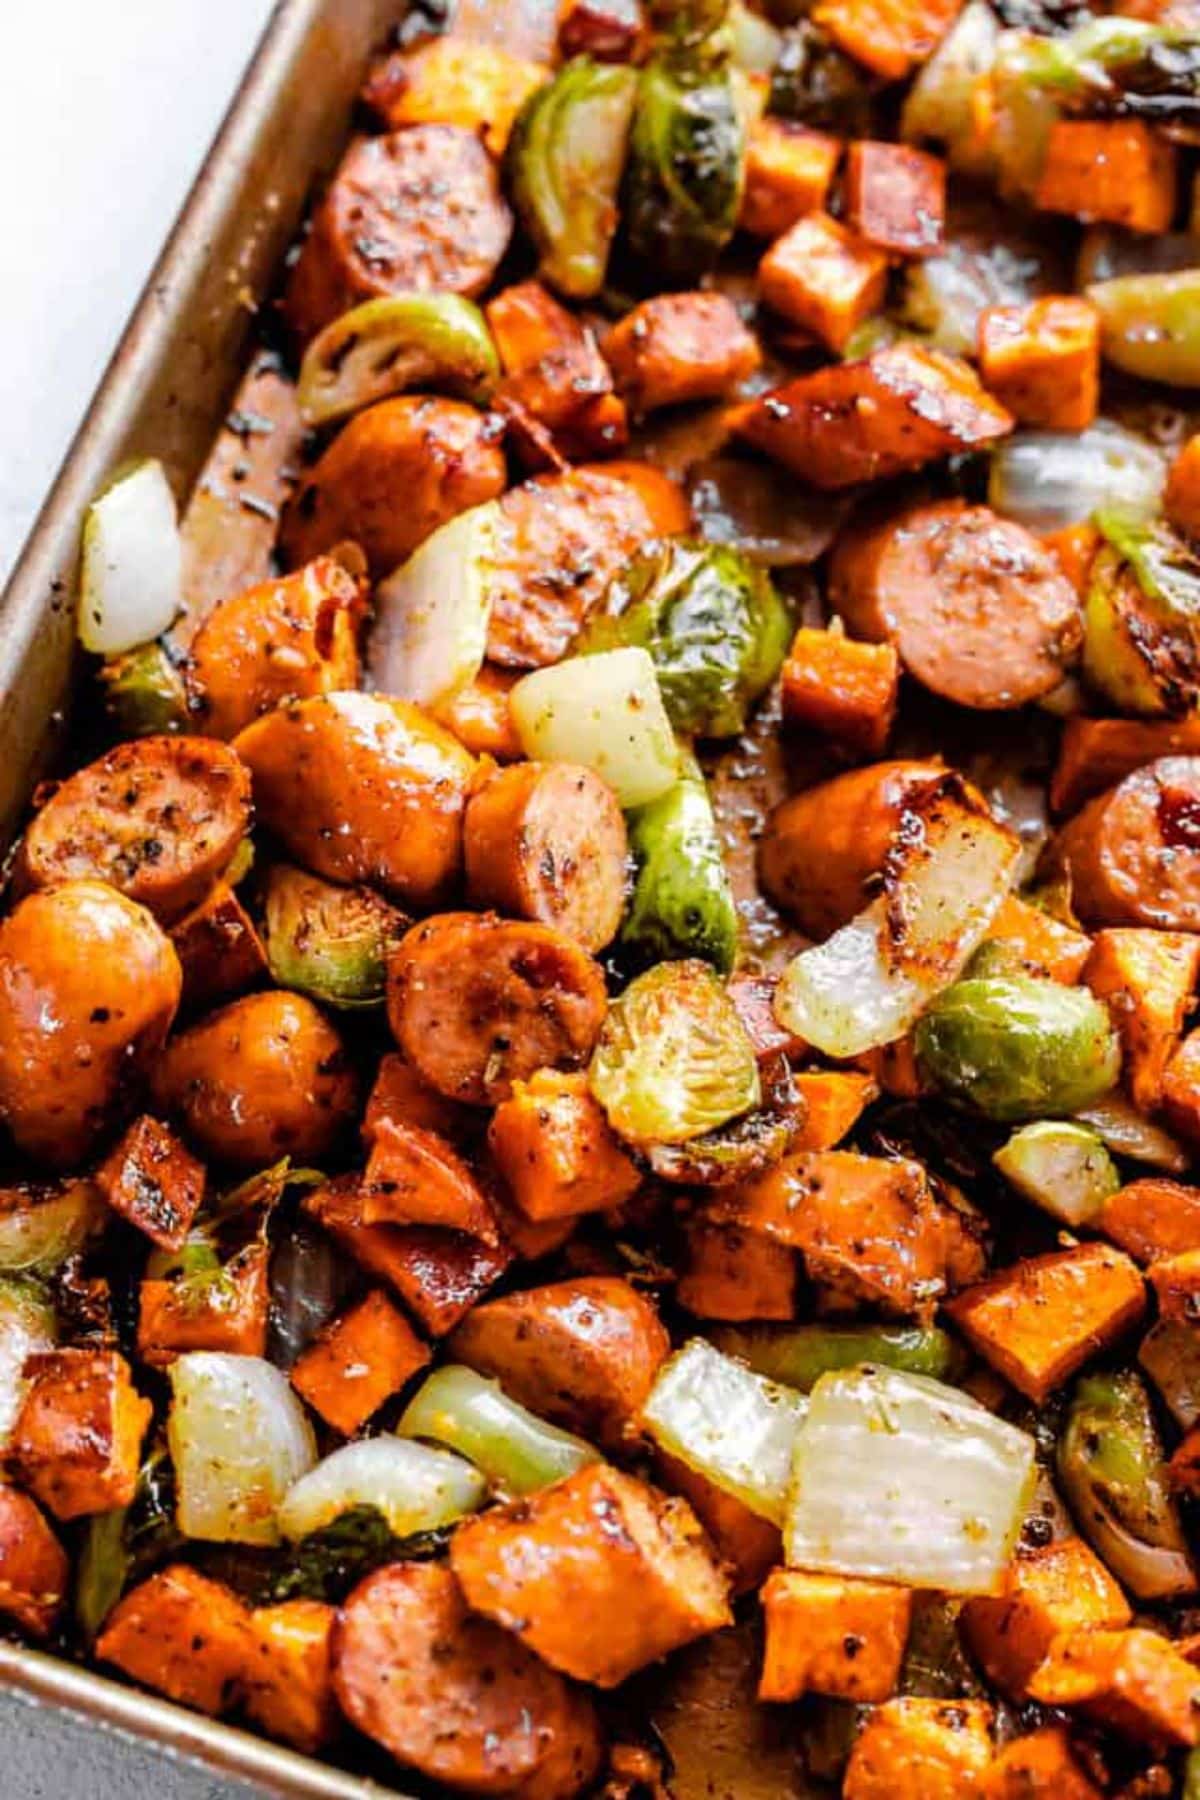 Juicy andouille sausage with sweet potatoes and brussel sprouts in a casserole.